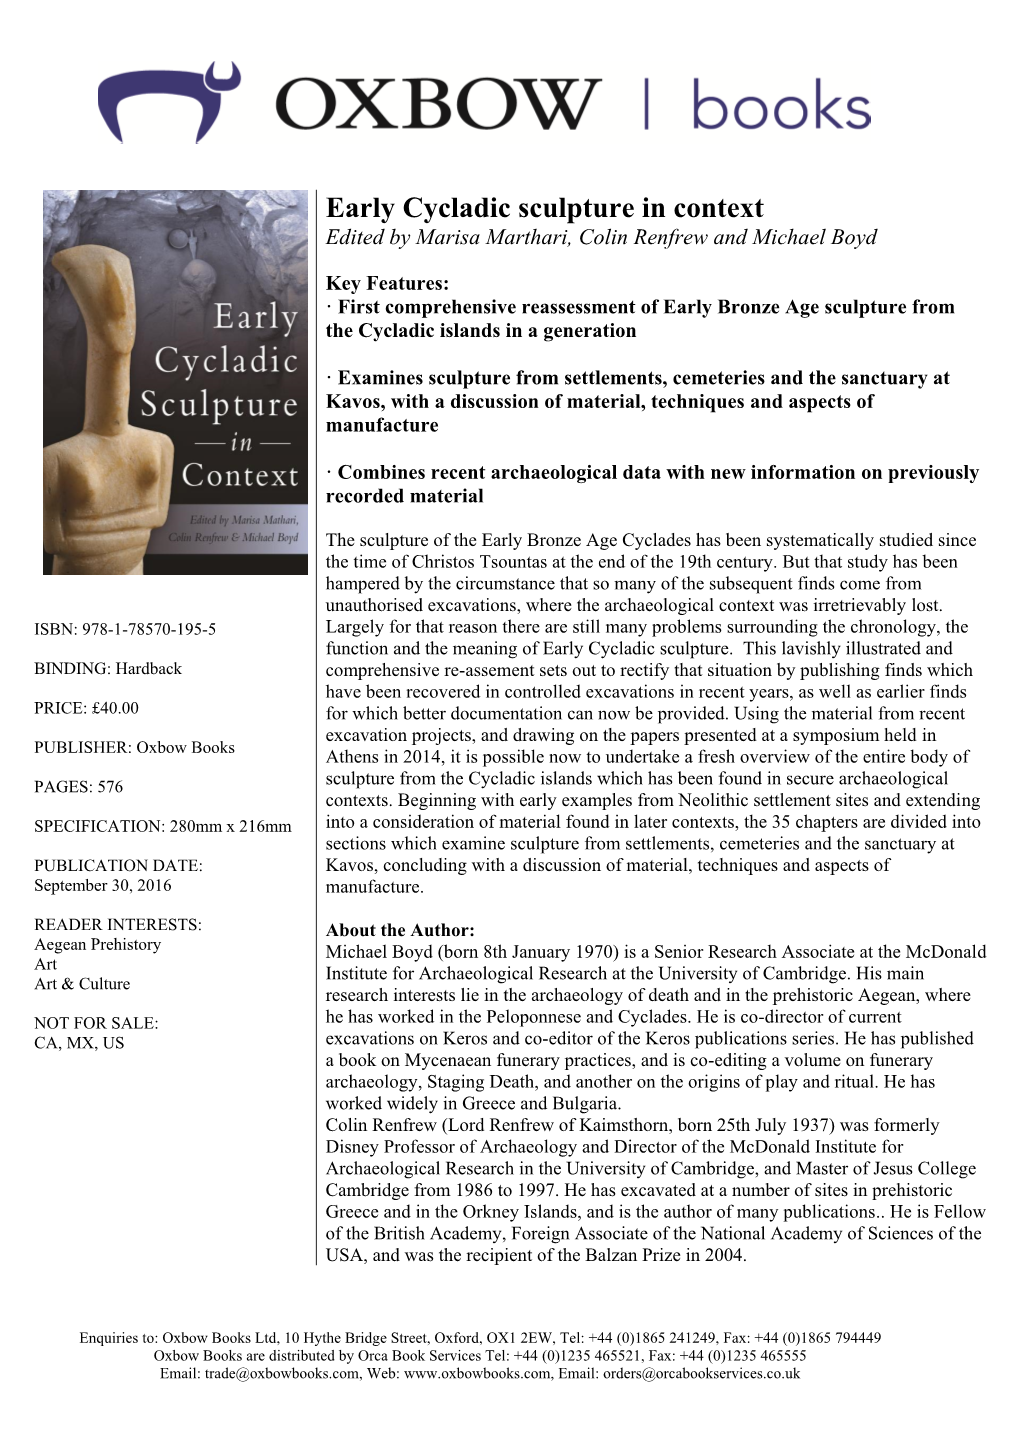 Early Cycladic Sculpture in Context Edited by Marisa Marthari, Colin Renfrew and Michael Boyd